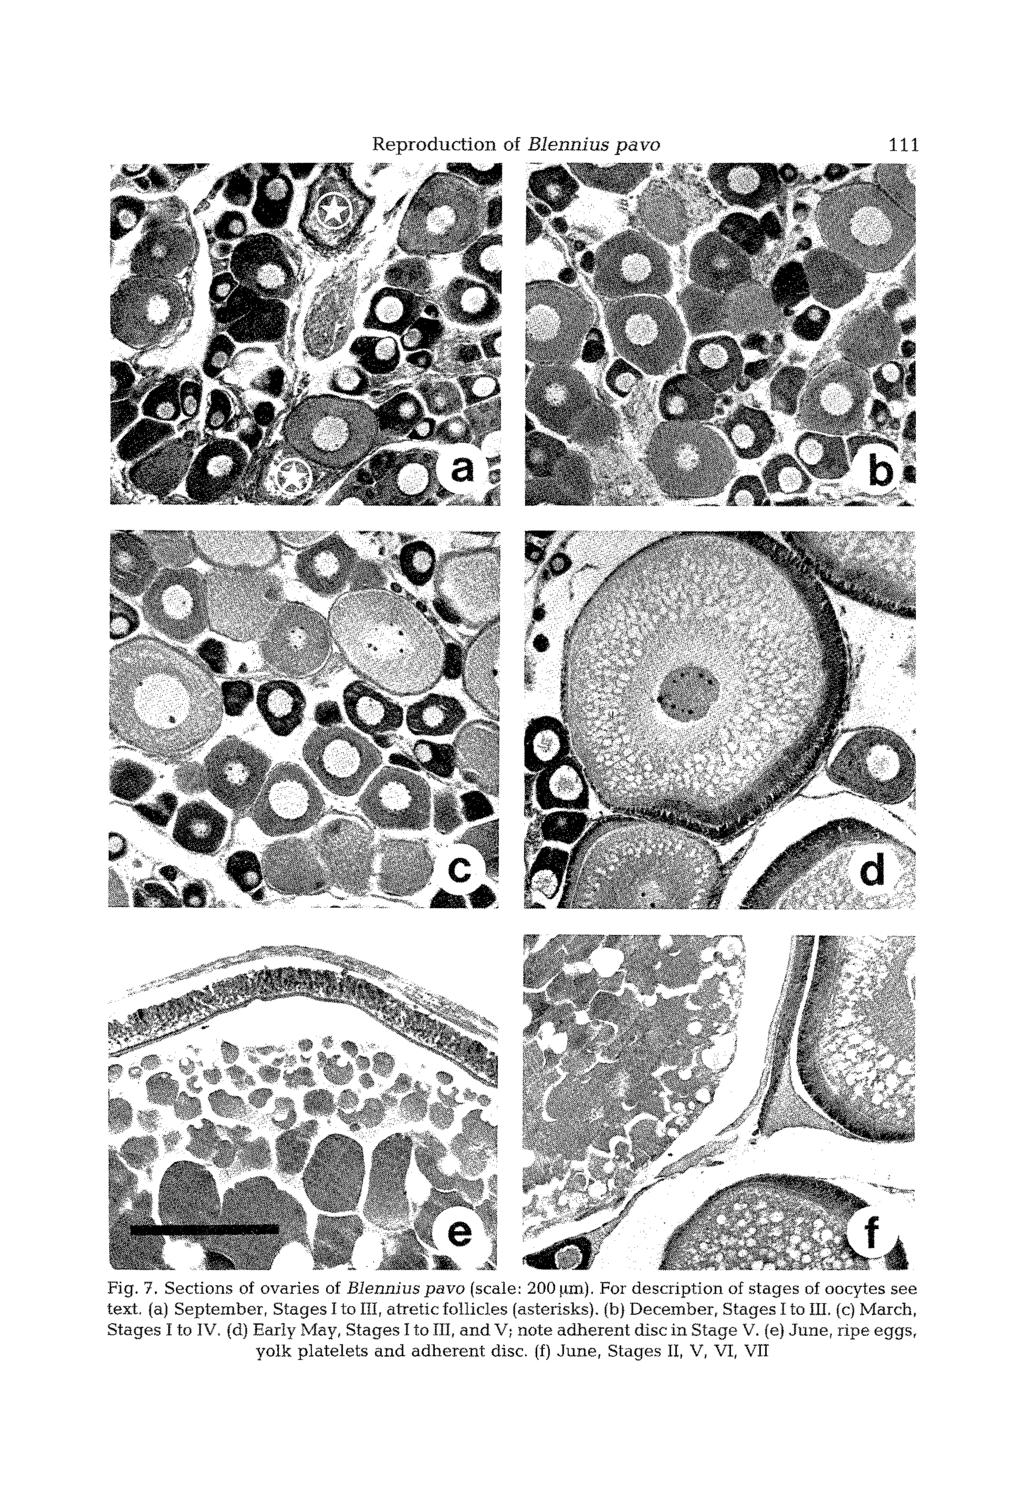 Reproduction of Blennius pavo 111 Fig. 7. Sections of ovaries of Blennius pavo (scale: 200 gin). For description of stages of oocytes see text.